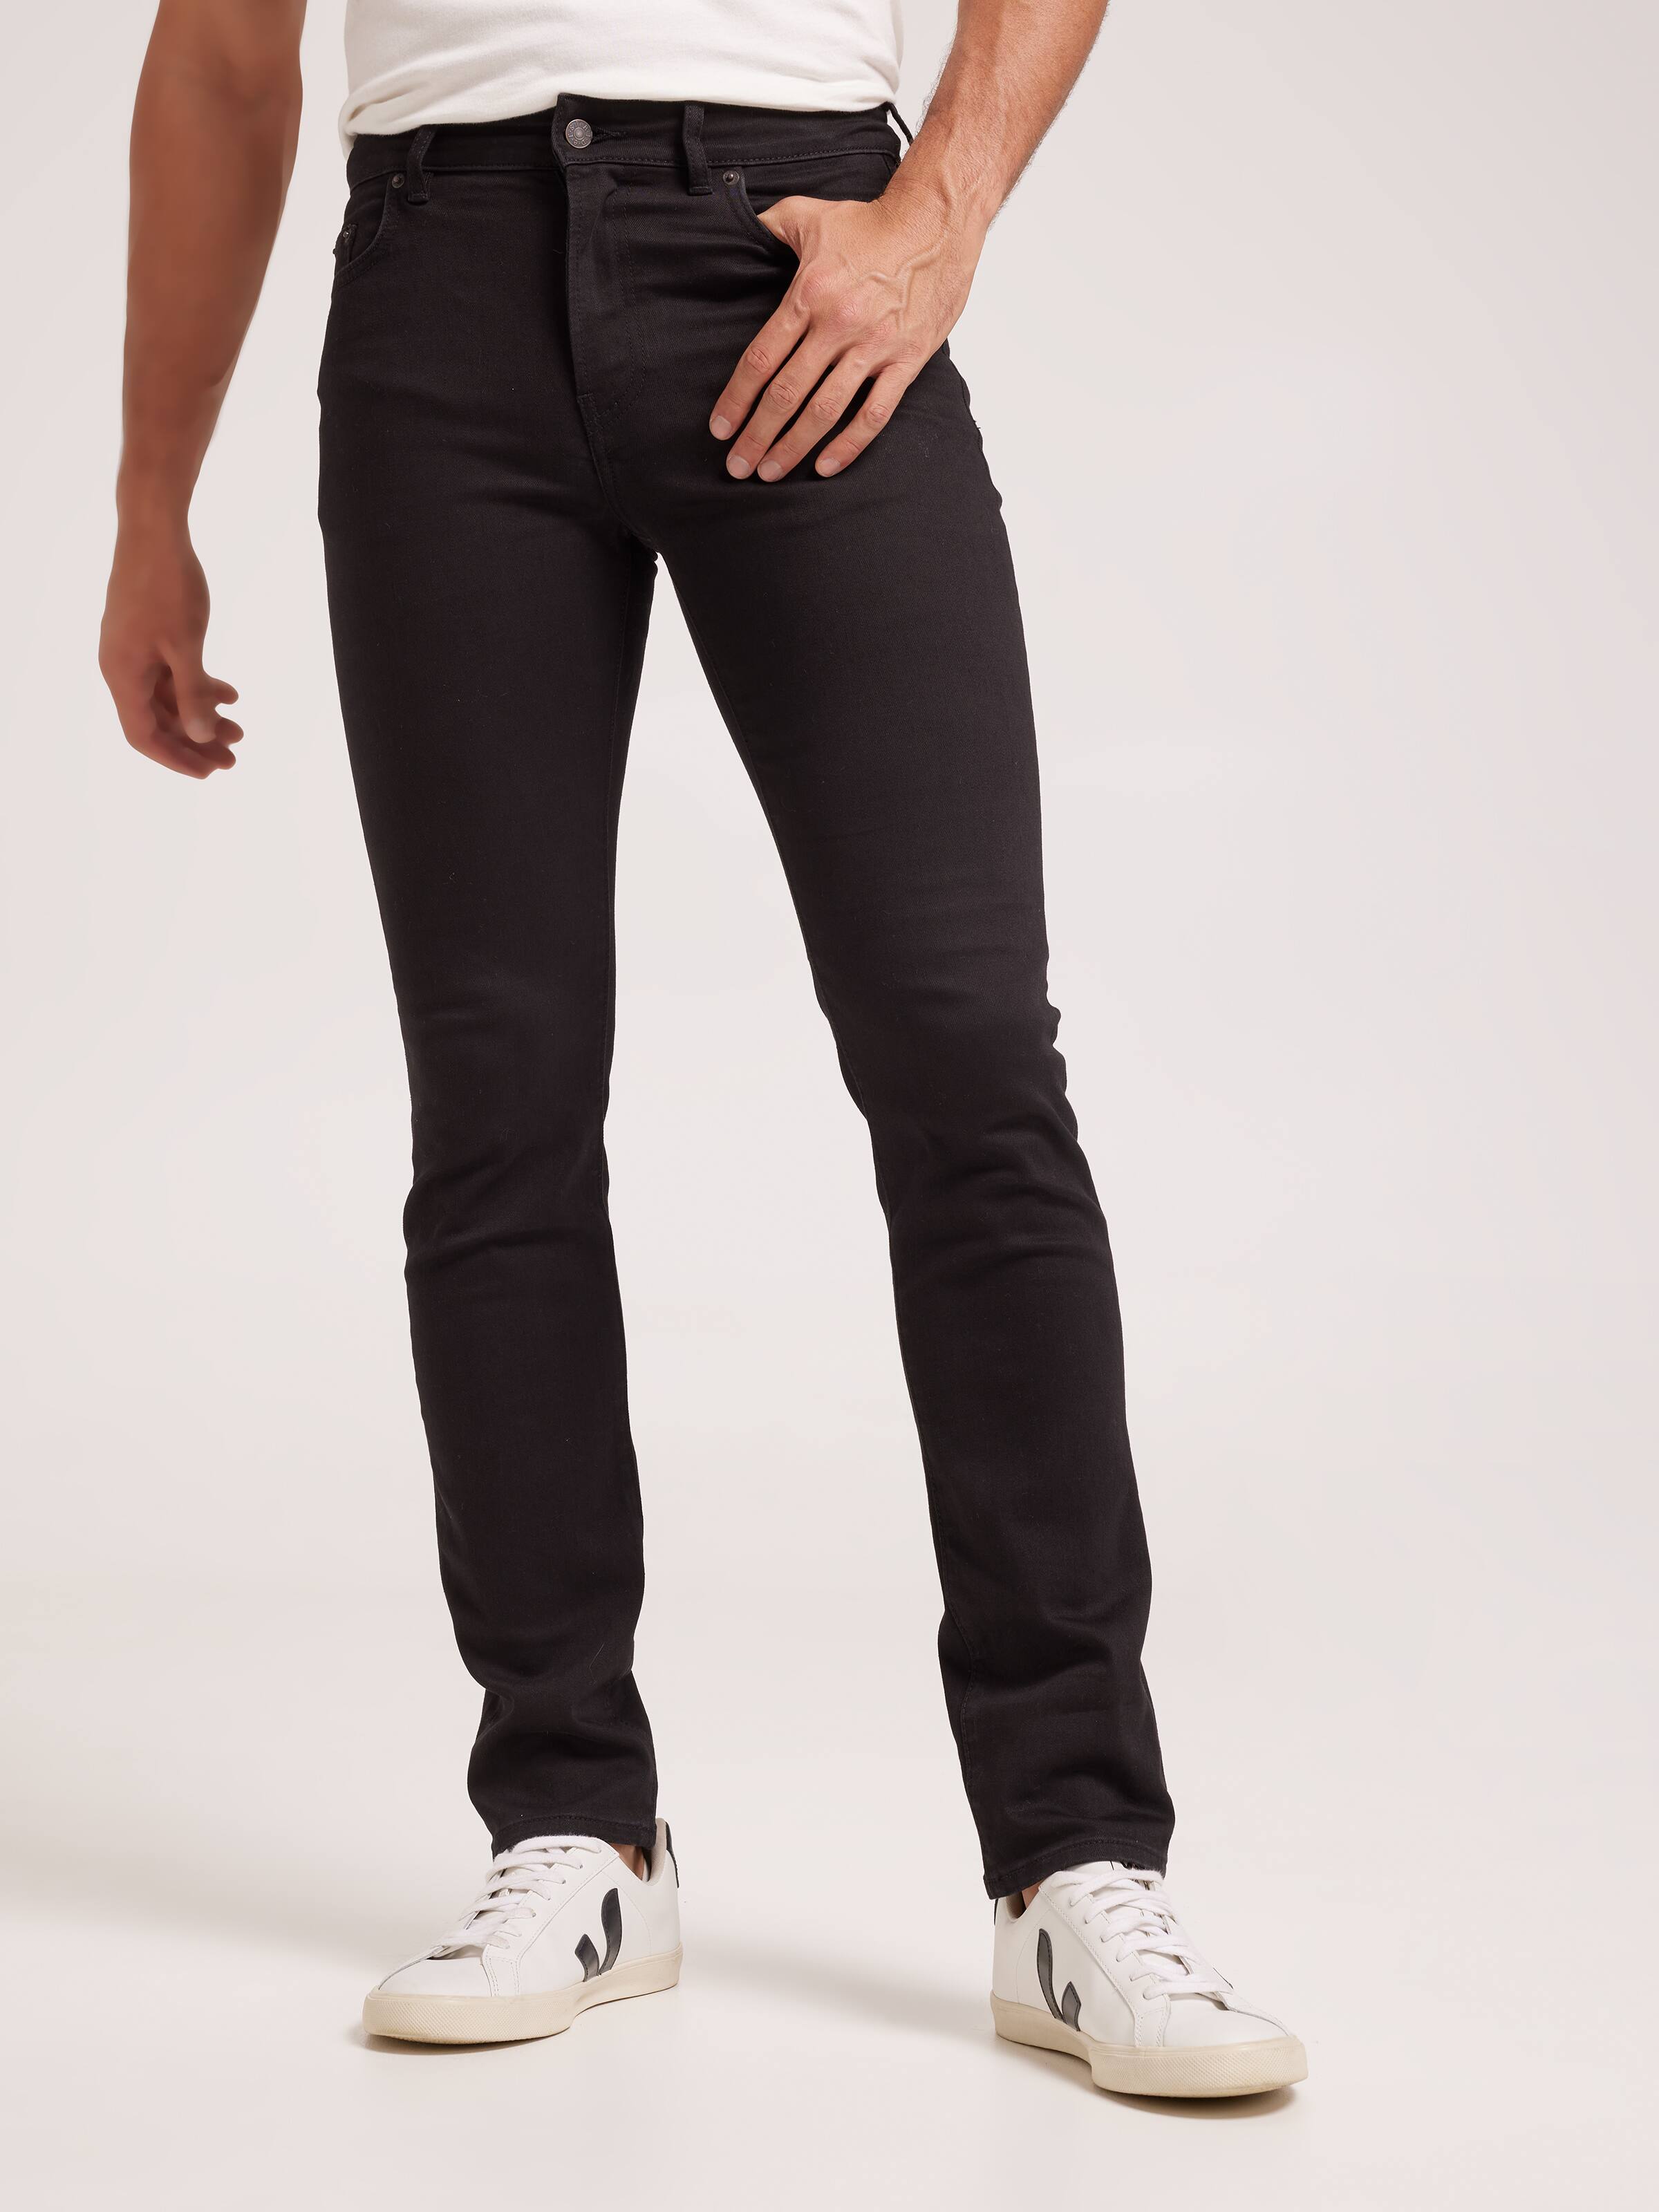 Buy Lee Riders Mens Straight Stretch Jeans (R058023) Stonewash - Riders by  Lee Online Australia